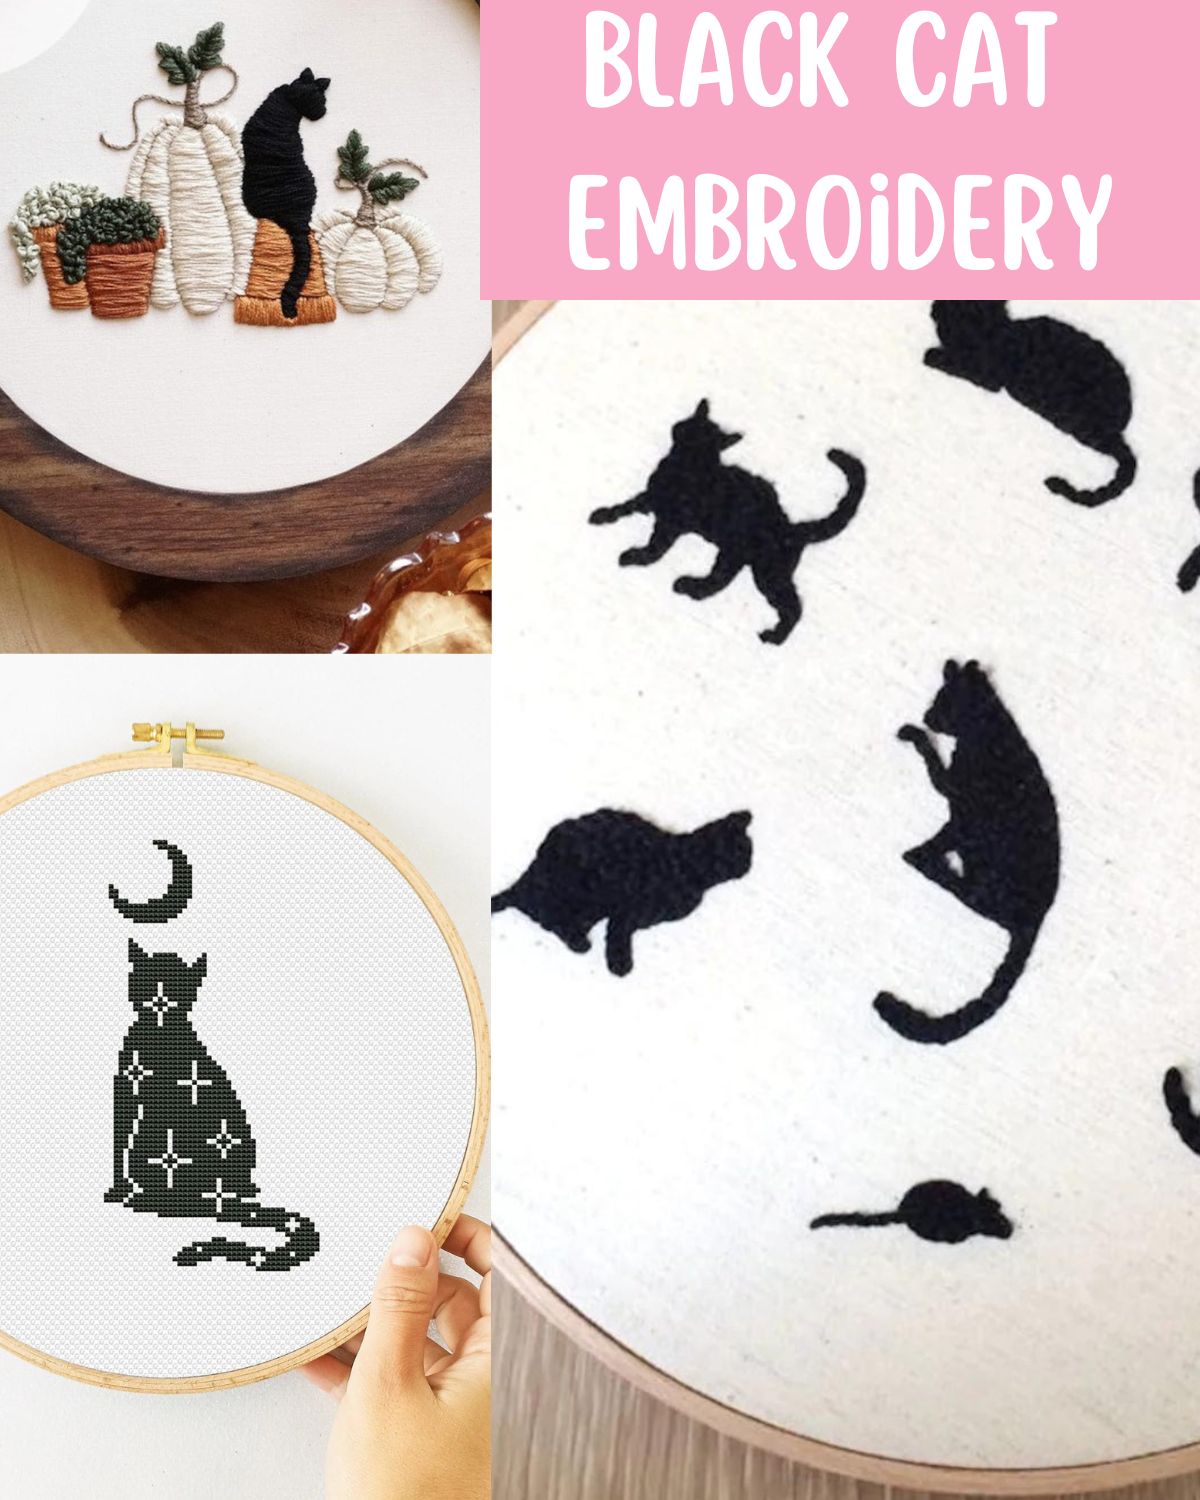 Black cats on embroidery pieces